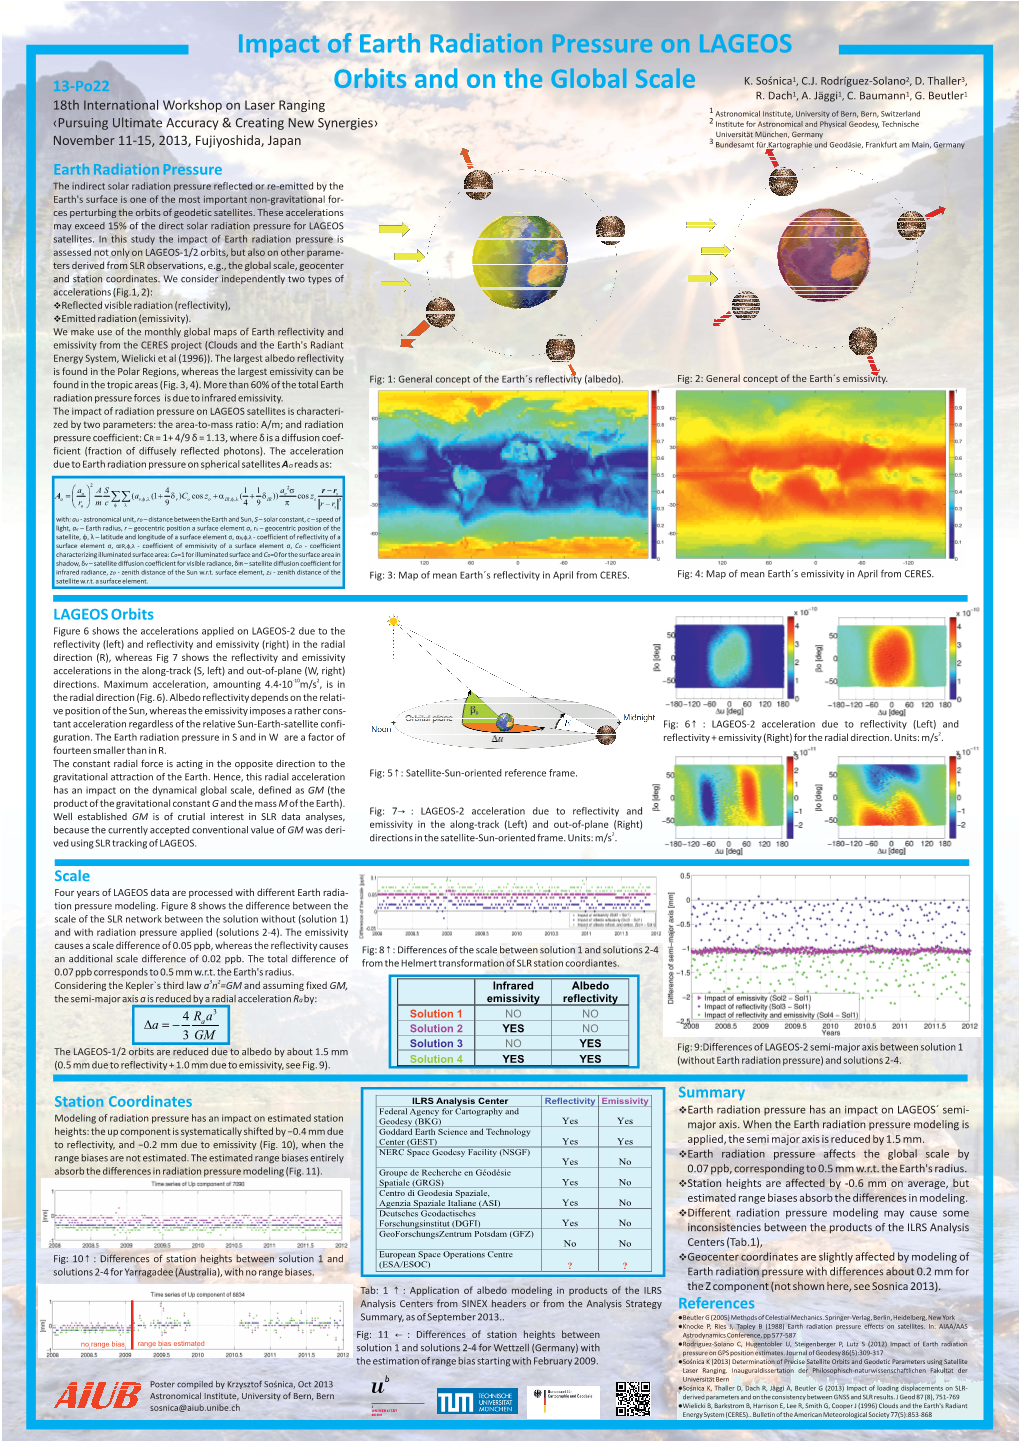 Impact of Earth Radiation Pressure on LAGEOS Orbits and on the Global